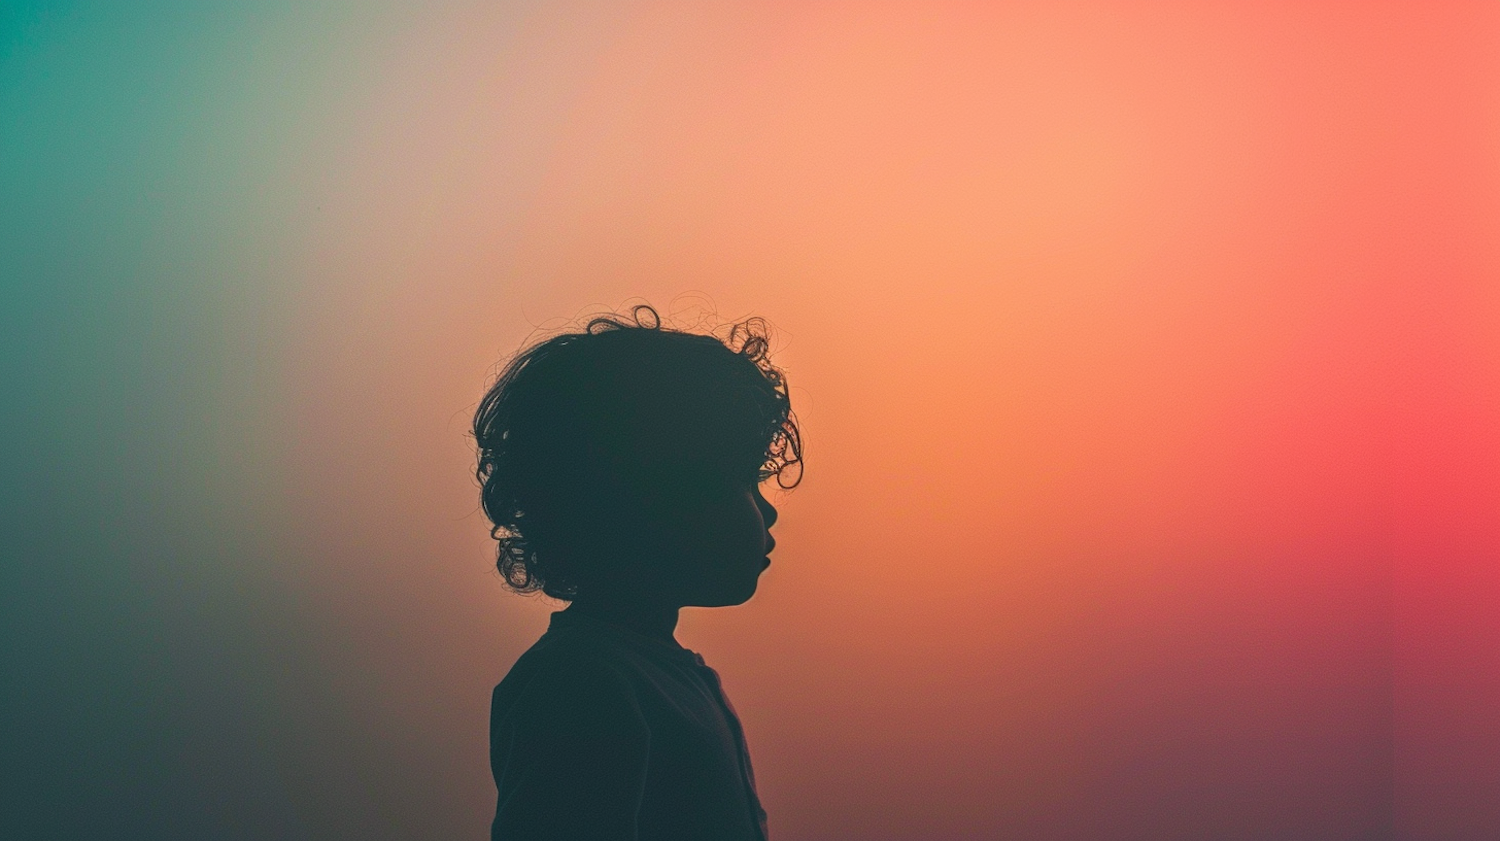 Child's Silhouette Against Gradient Background